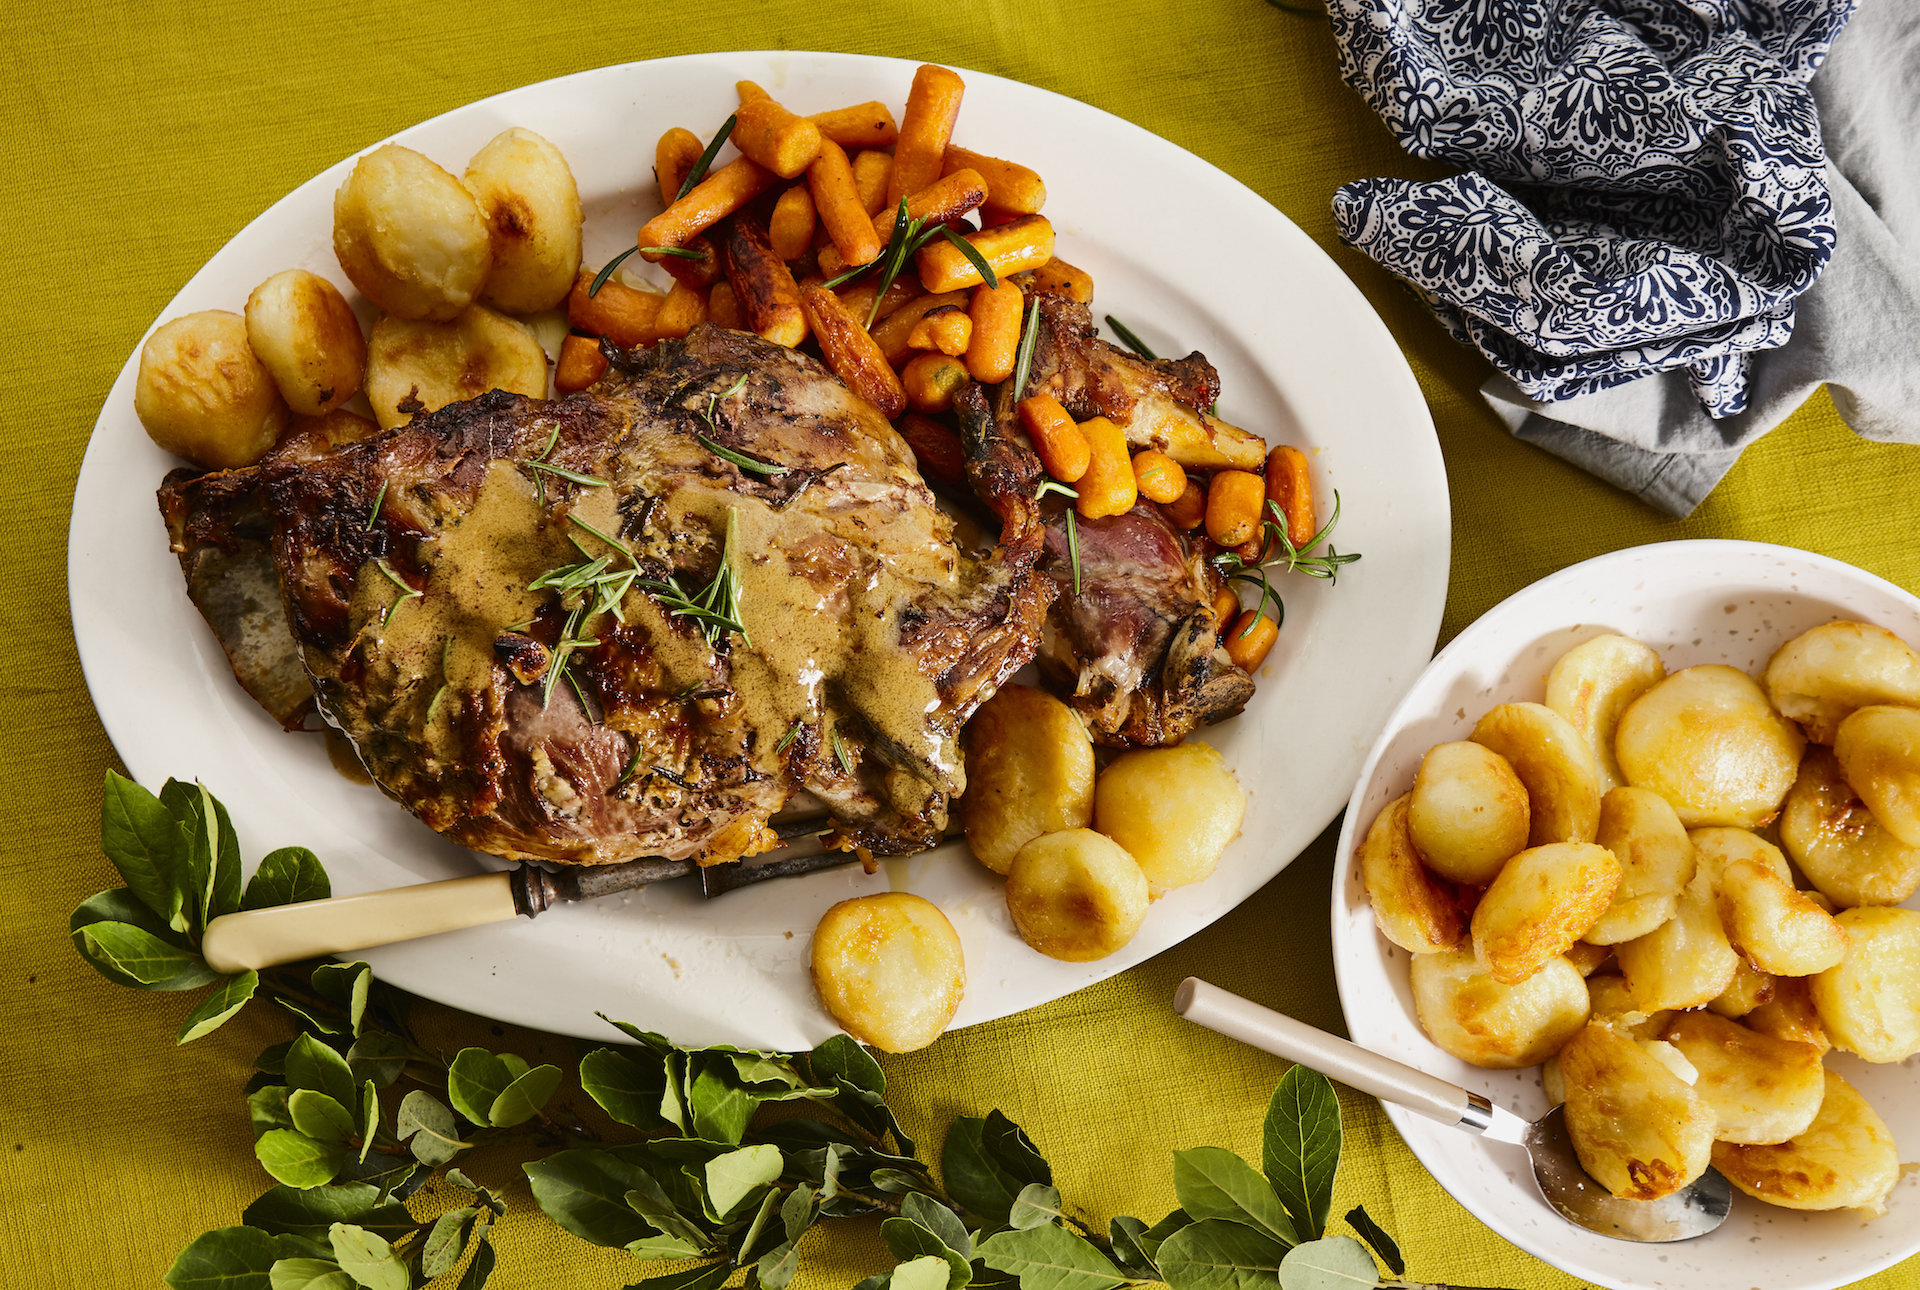 Roasted Lamb With Carrots & Potatoes